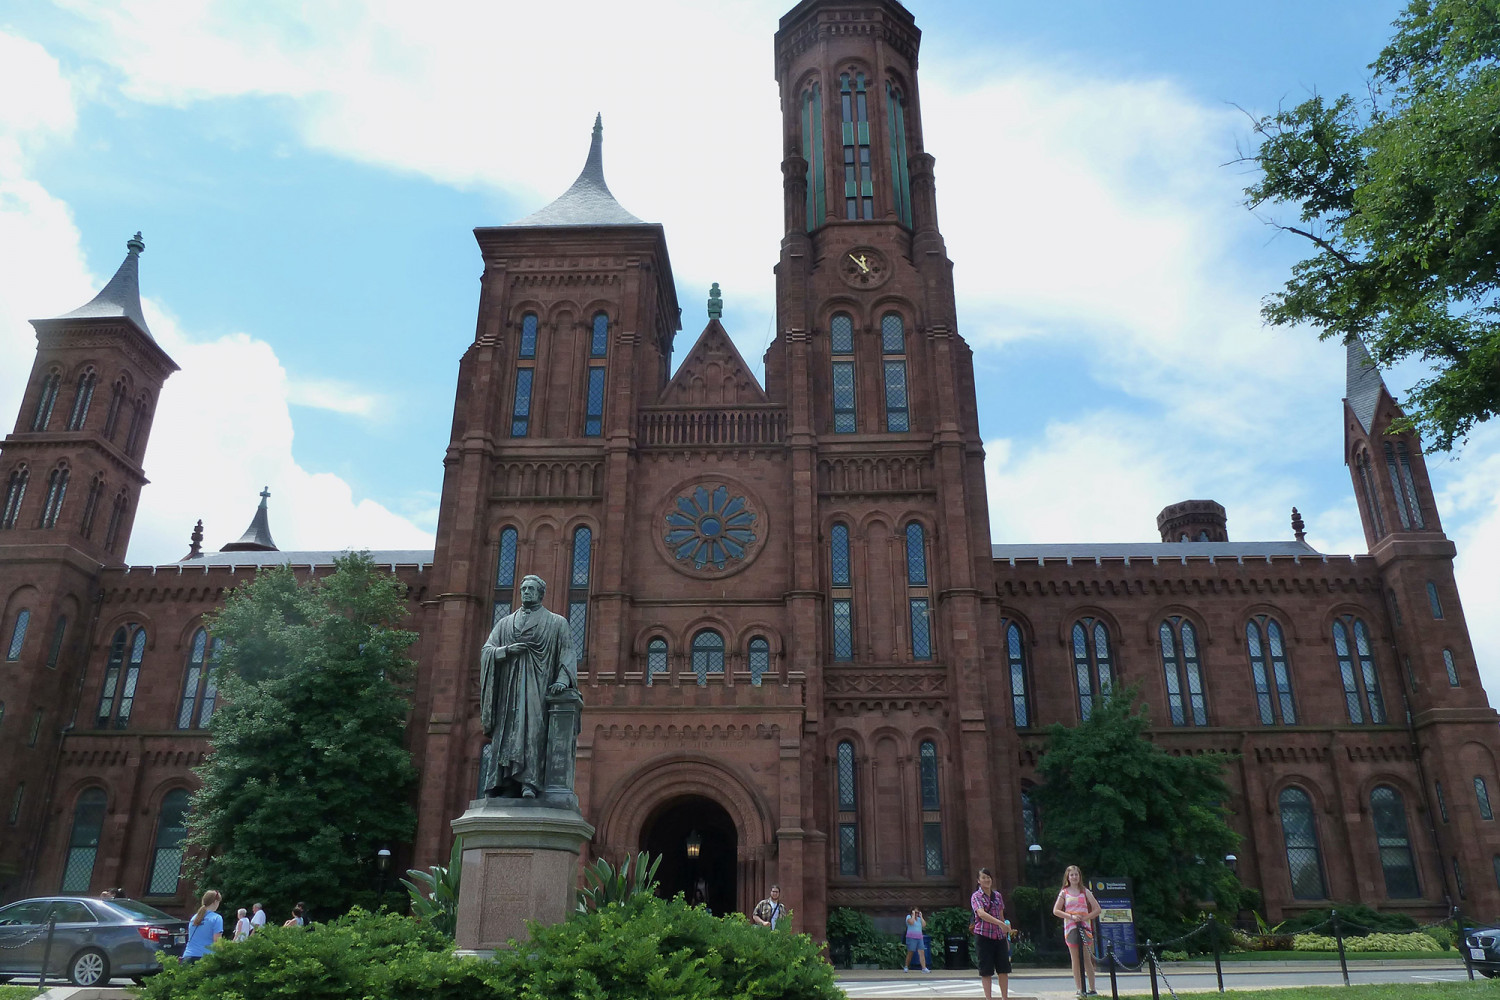 A photo of the Smithsonian Museum in Washington, D.C.